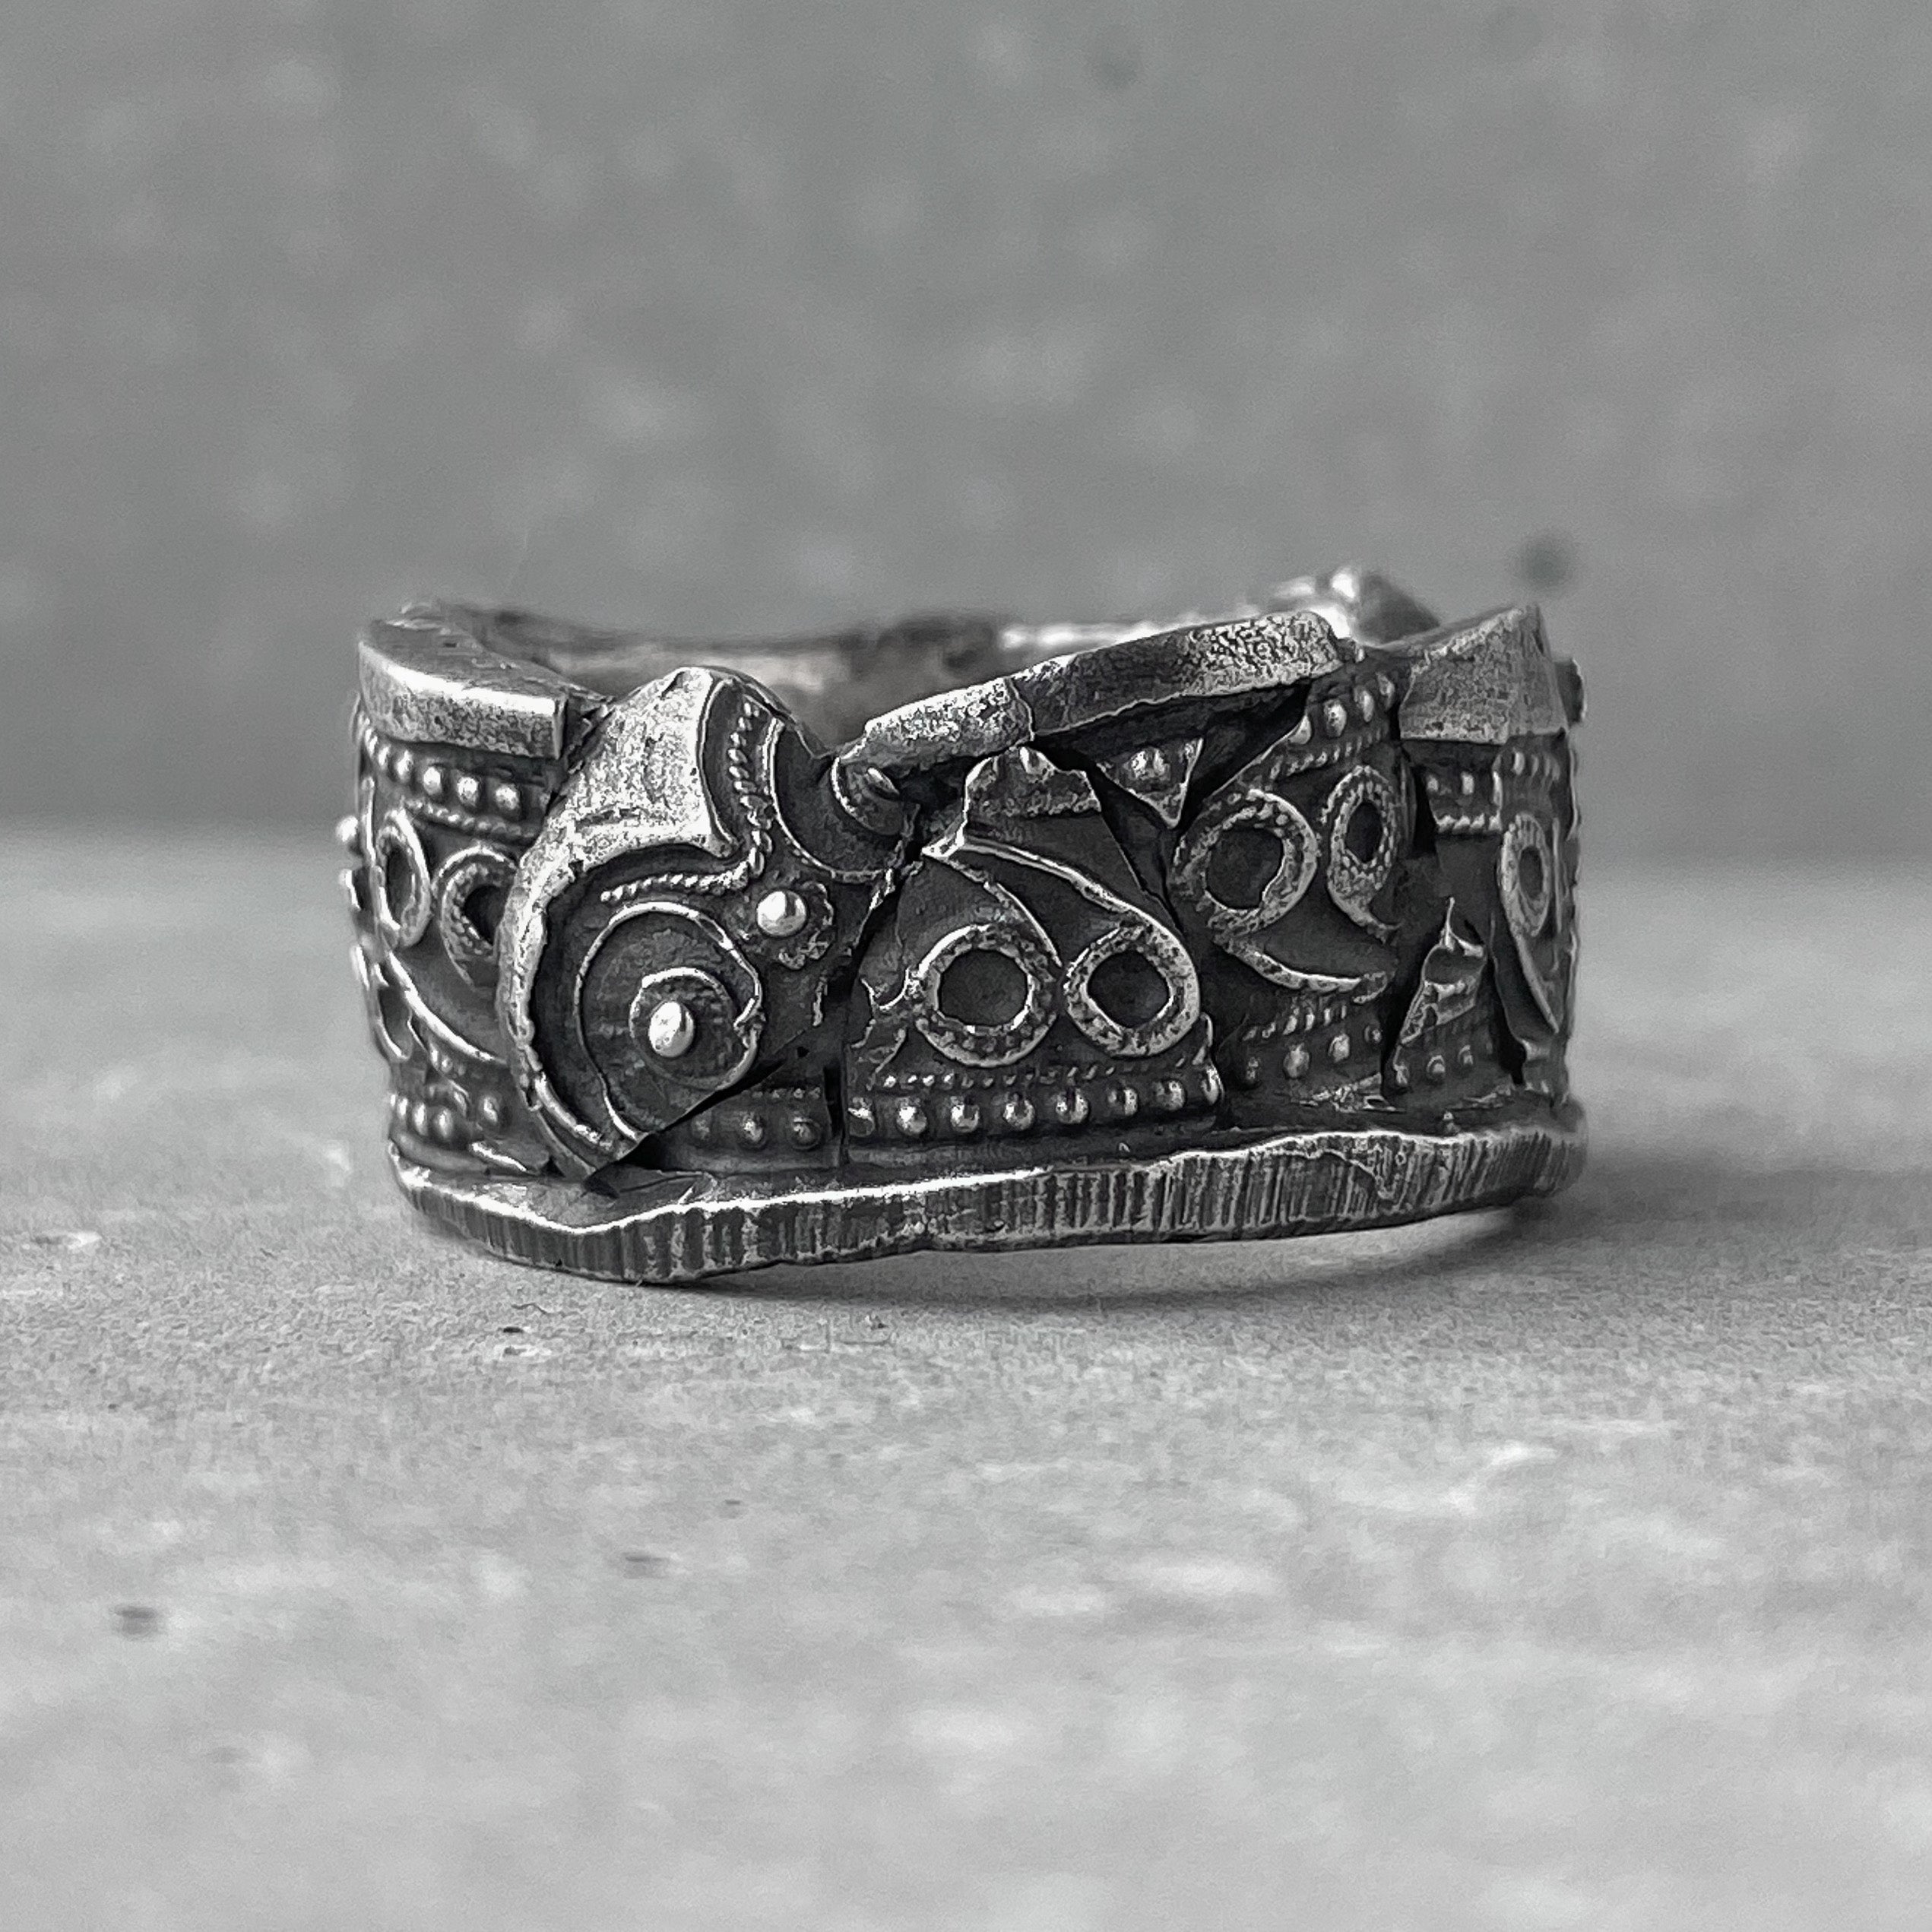 Ornament ring - wide brutal ring with a caucasian pattern and cracks